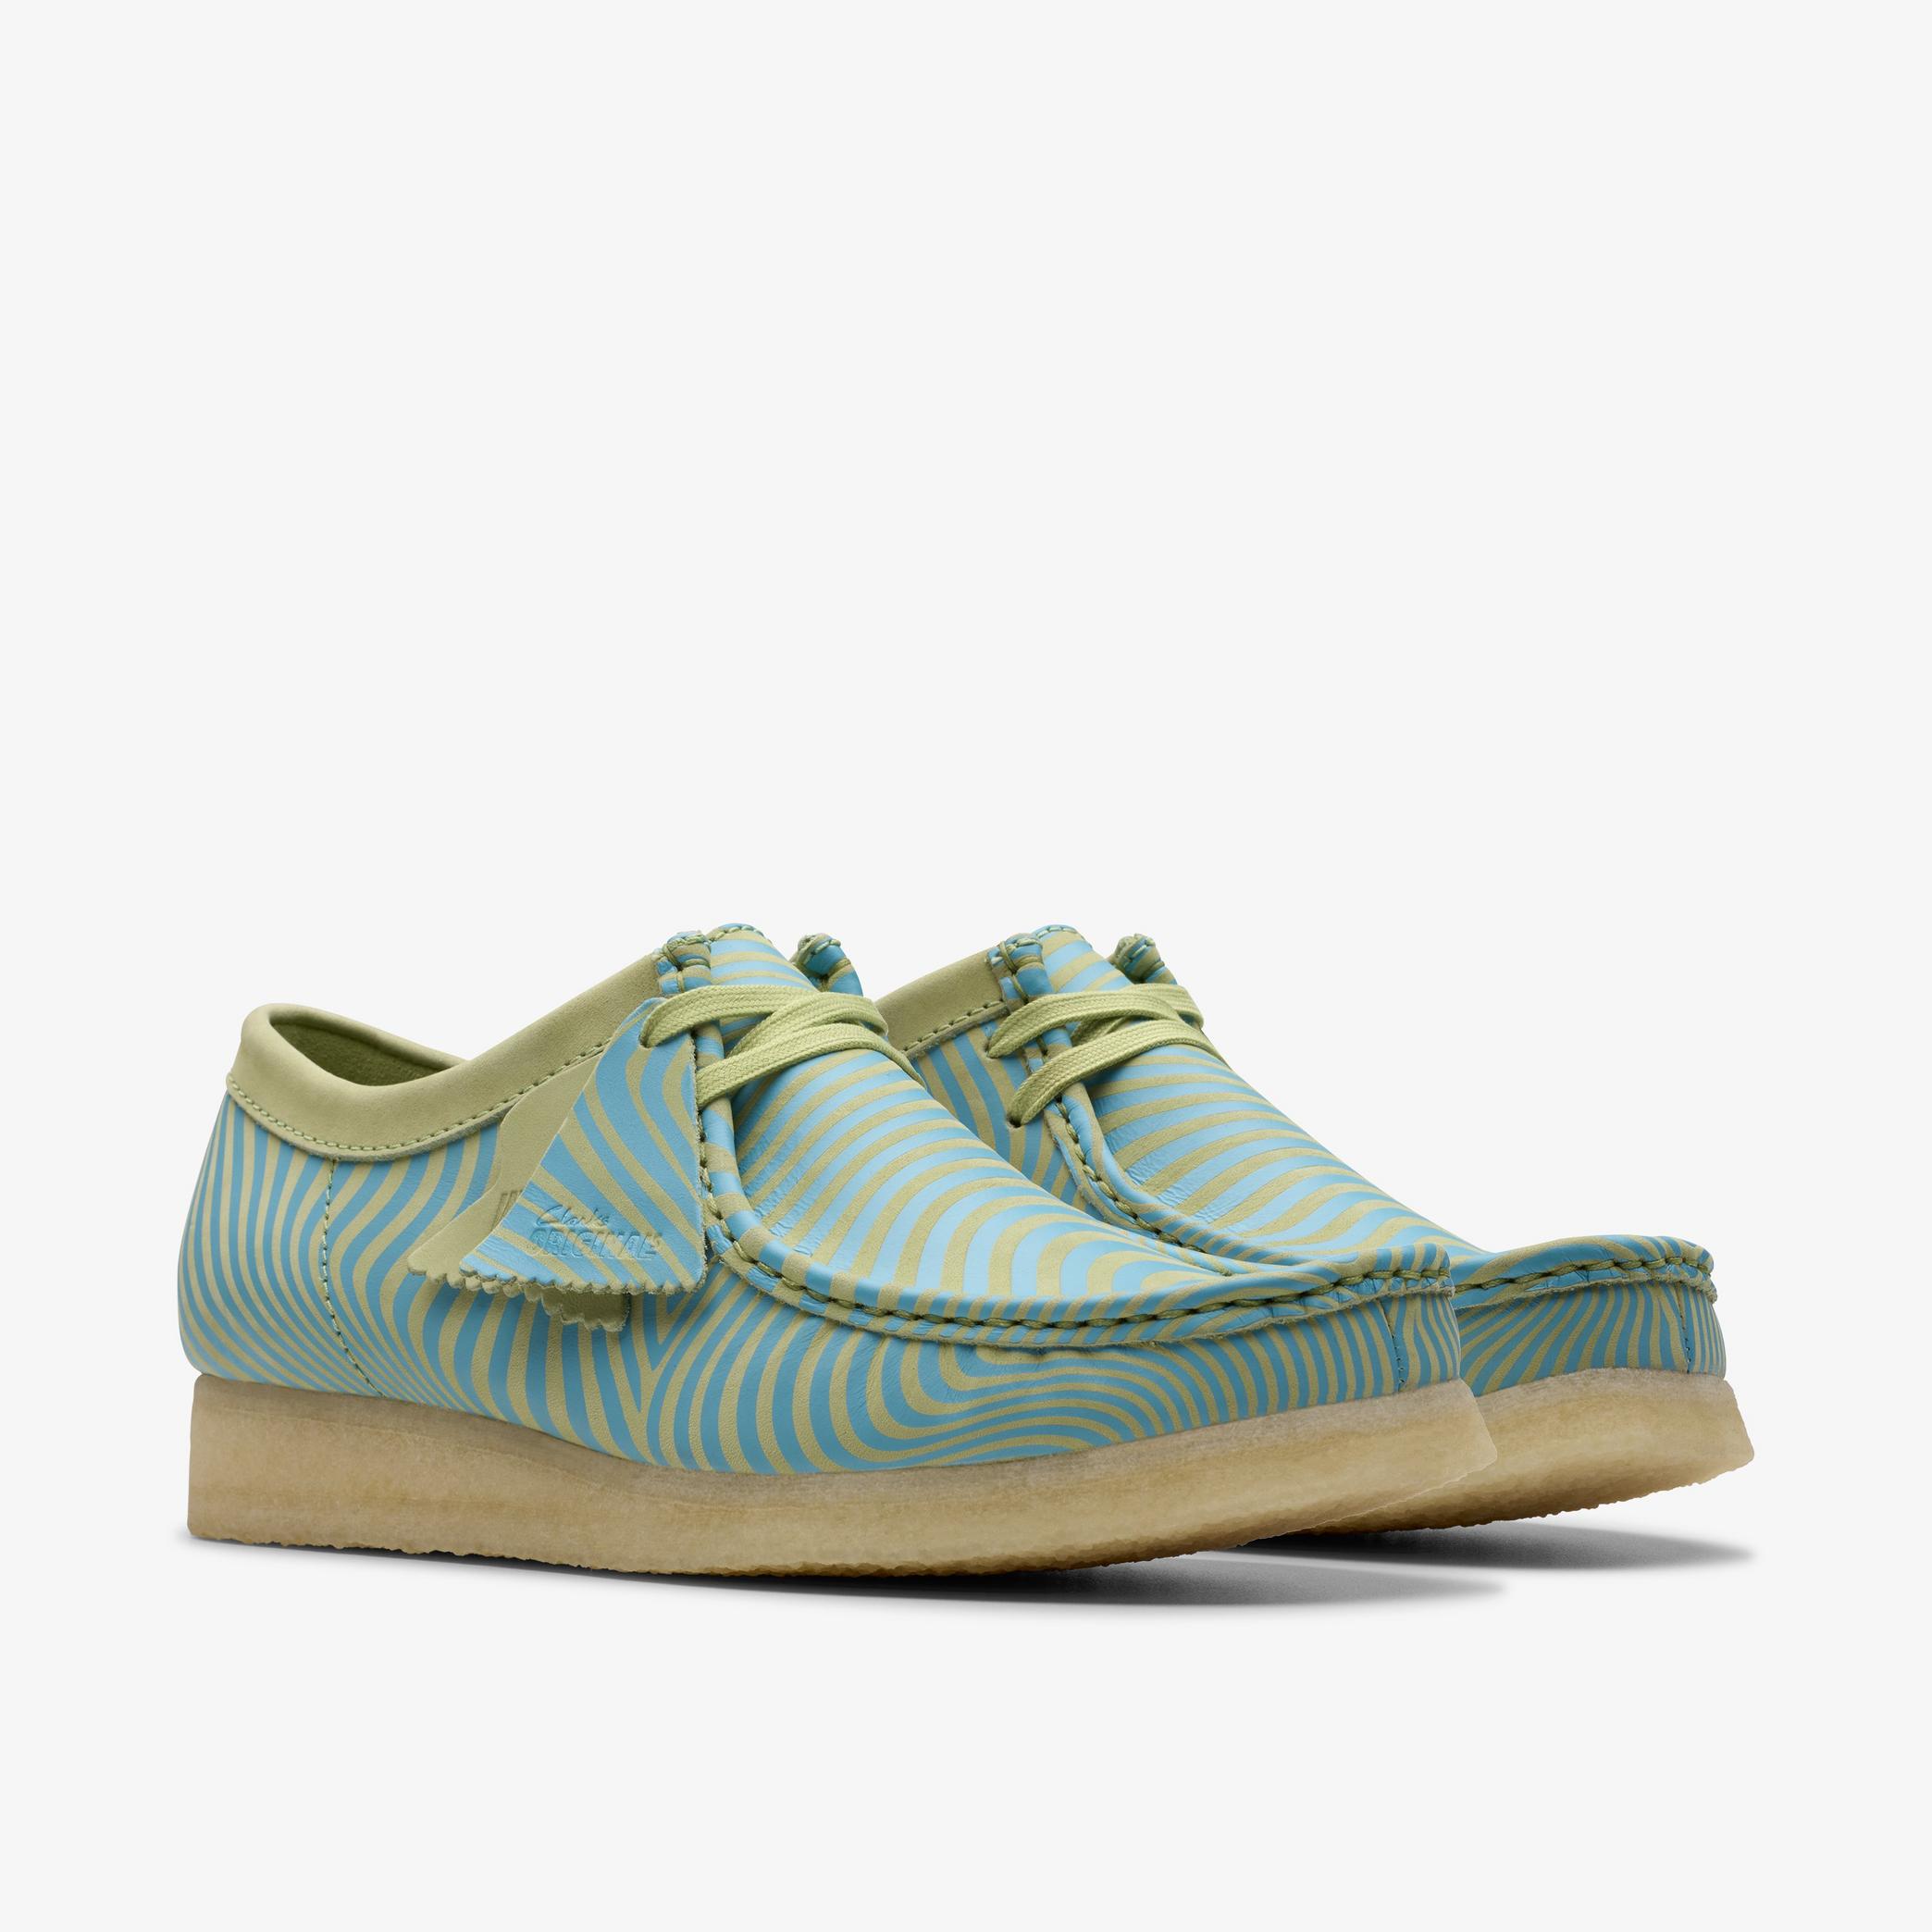 Wallabee Blue/Lime Print Wallabee, view 4 of 7